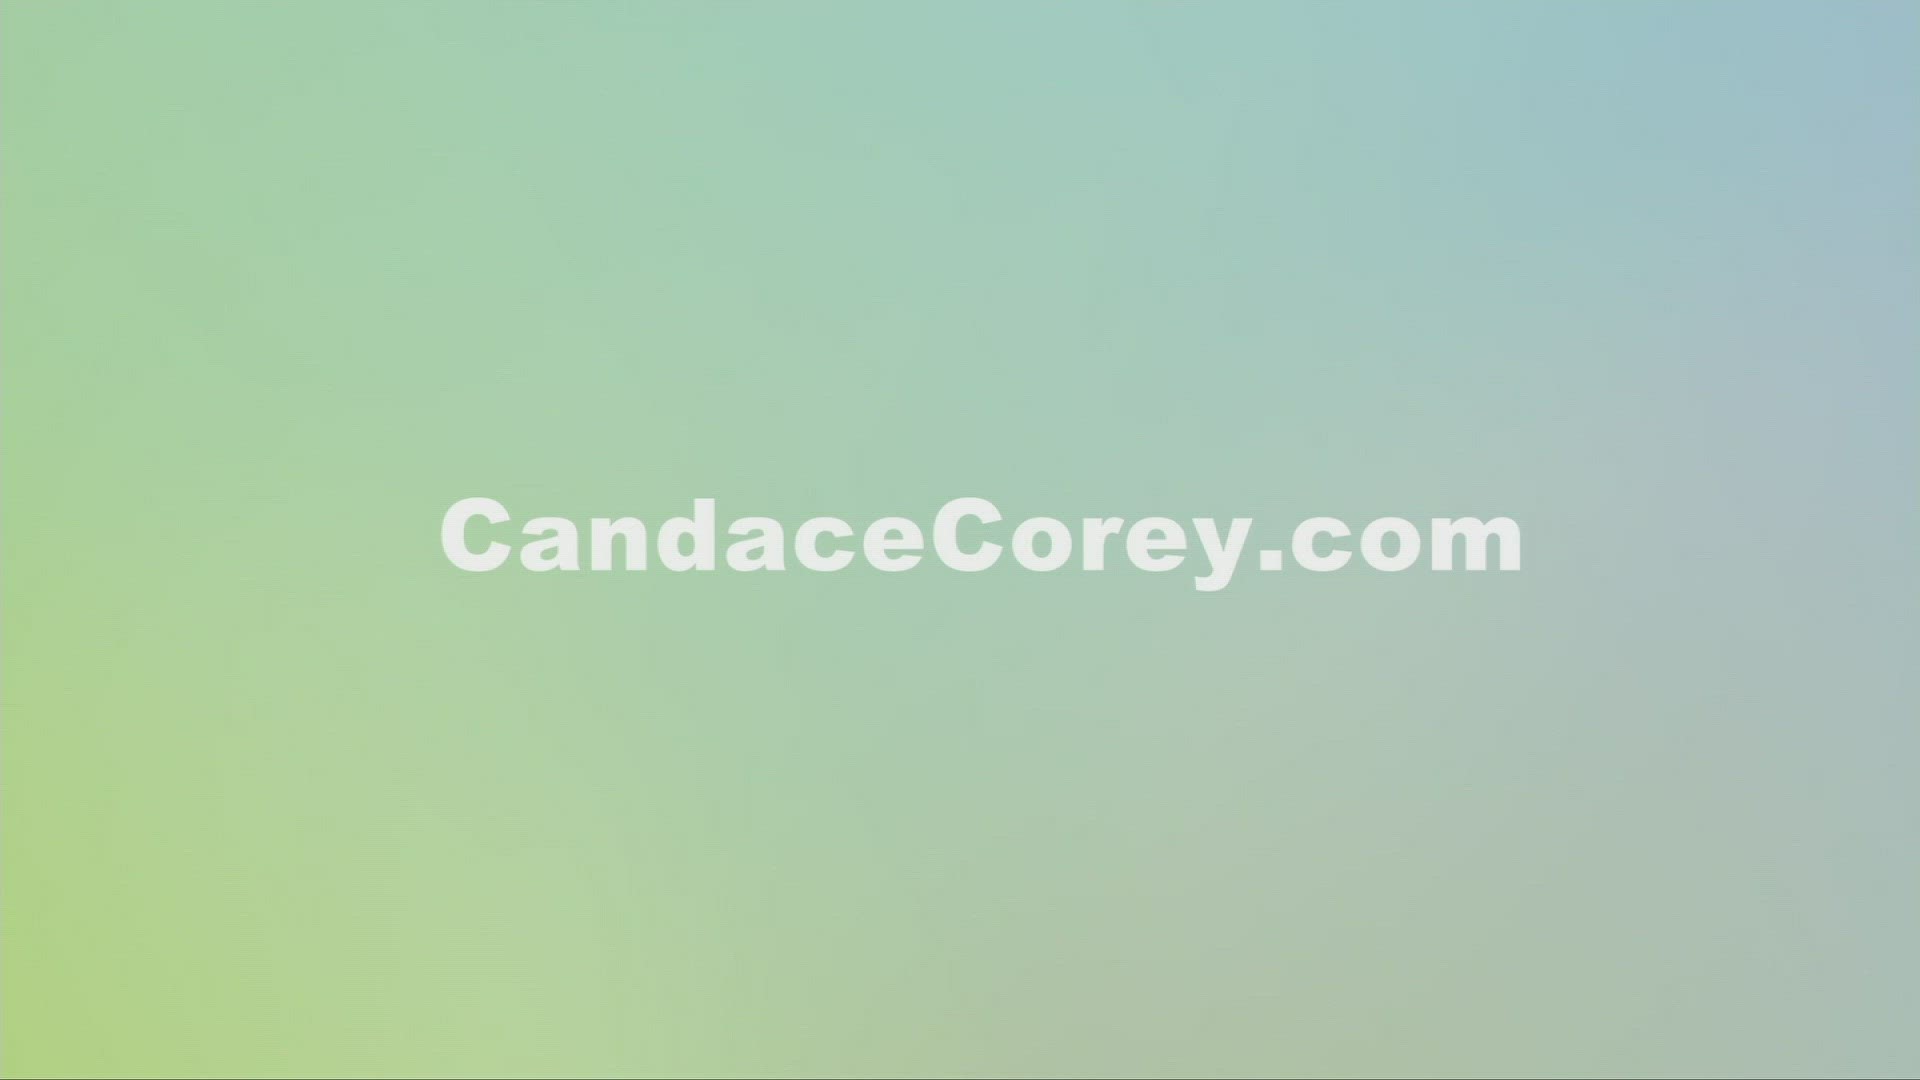 Candace Corey walks us through some products you can use to update your beauty routine for the new season! Sponsored by: Candacecorey.com